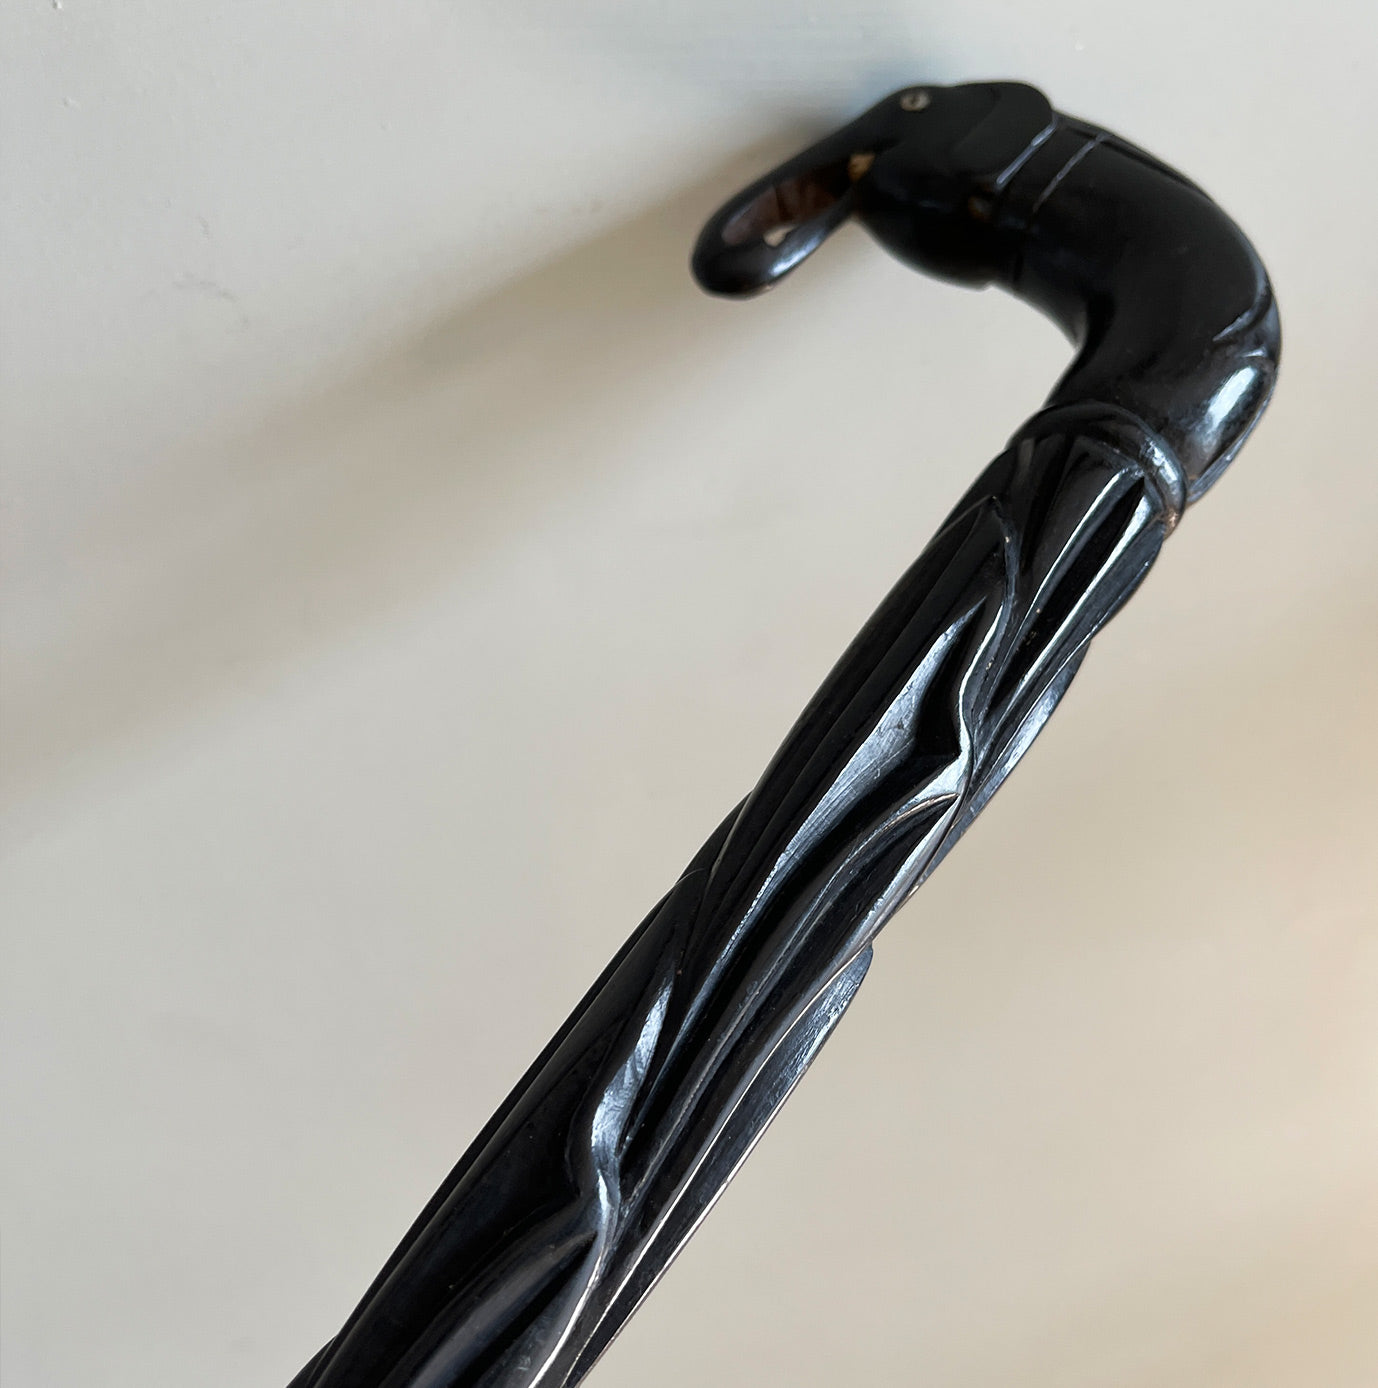 An Ebonised Elephant Walking Stick, with carved Elephant head handle and further carved detail to the shaft - SHOP NOW - www.intovintage.co.uk